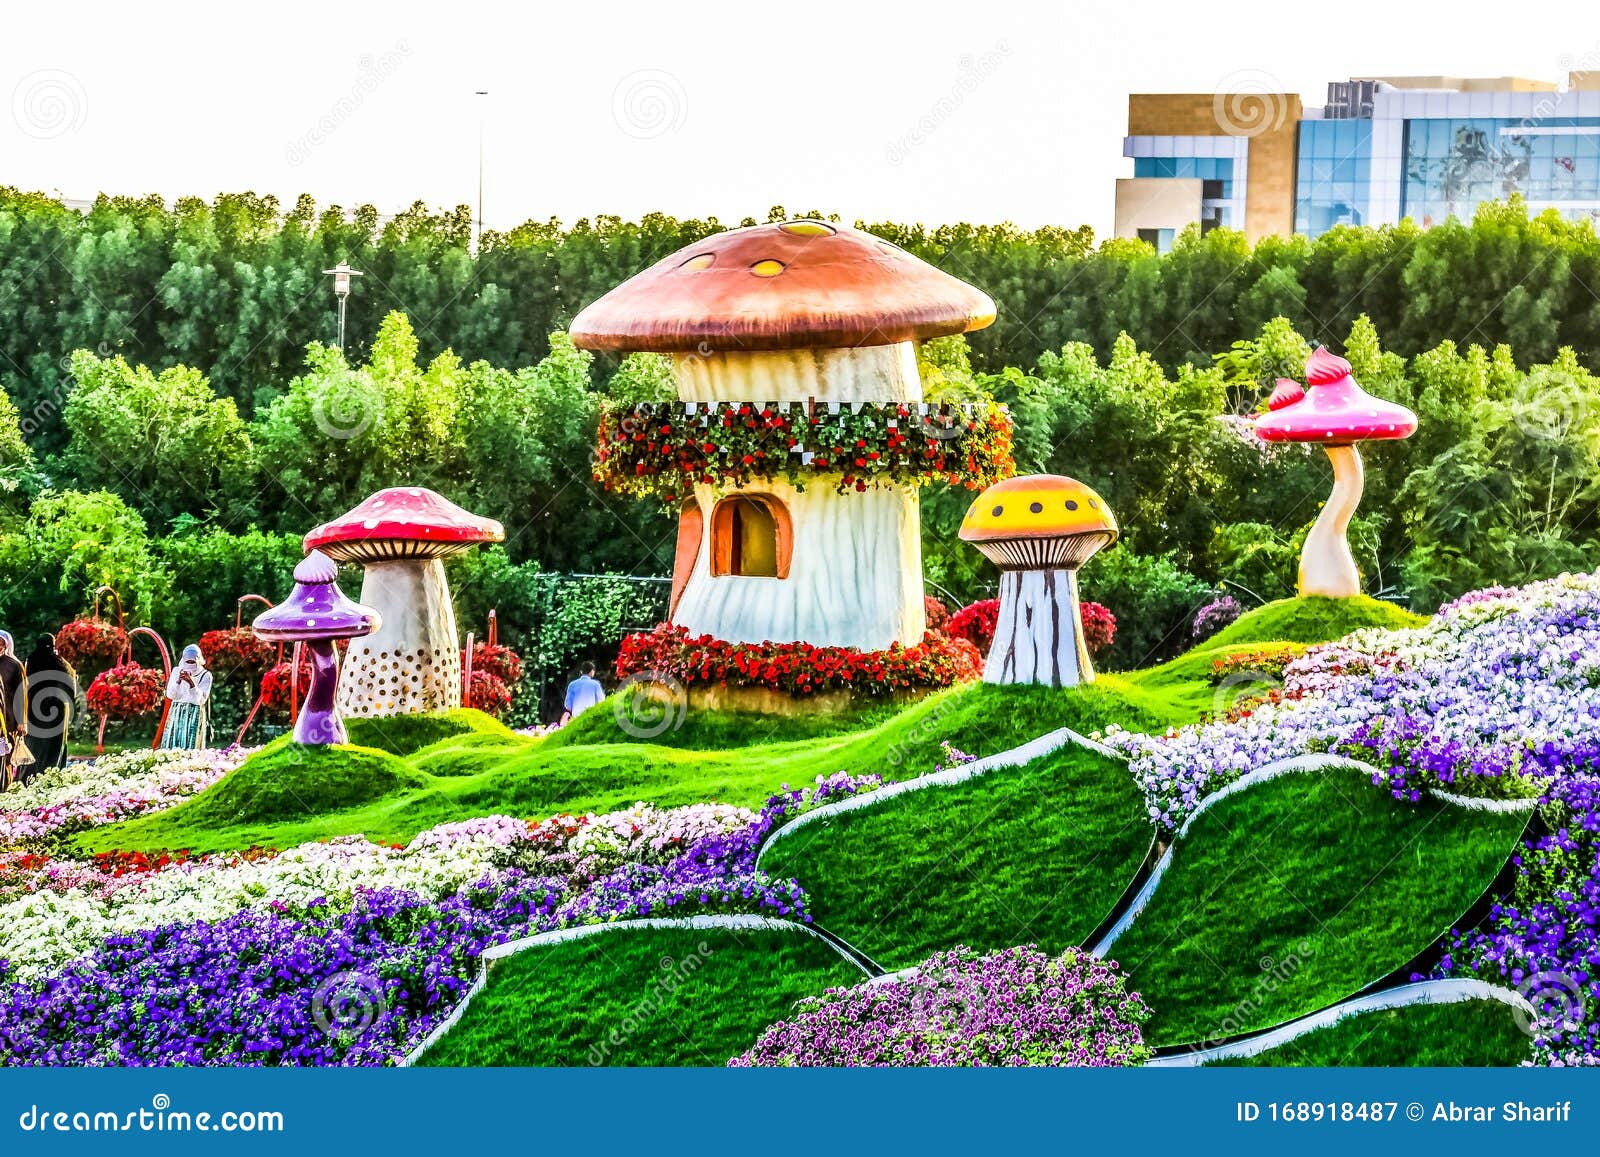 Dubai Miracle Garden Tickets Attractions To The World S Largest Flower Park